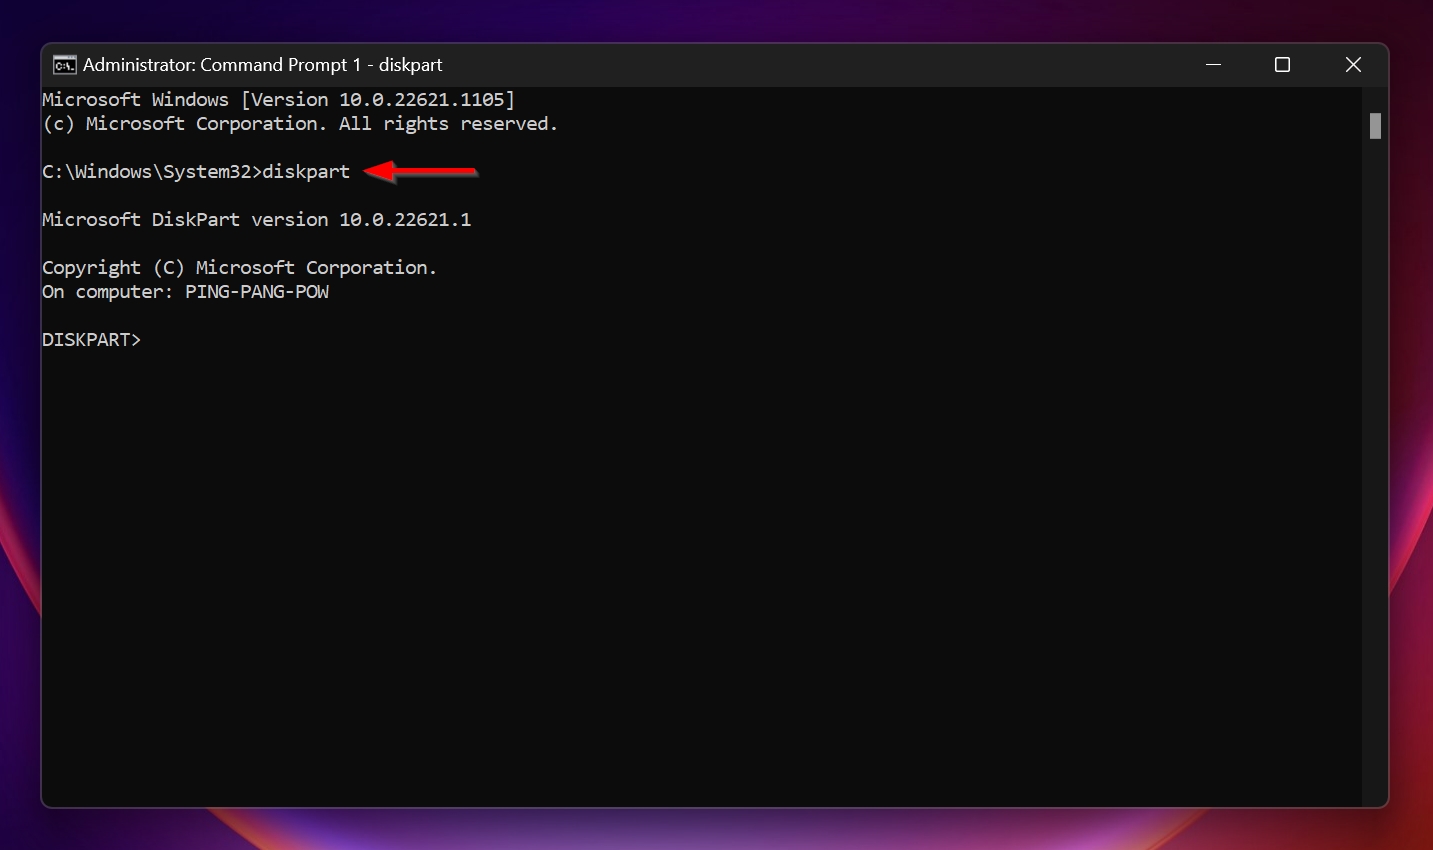 The Diskpart command in the Command Prompt console.